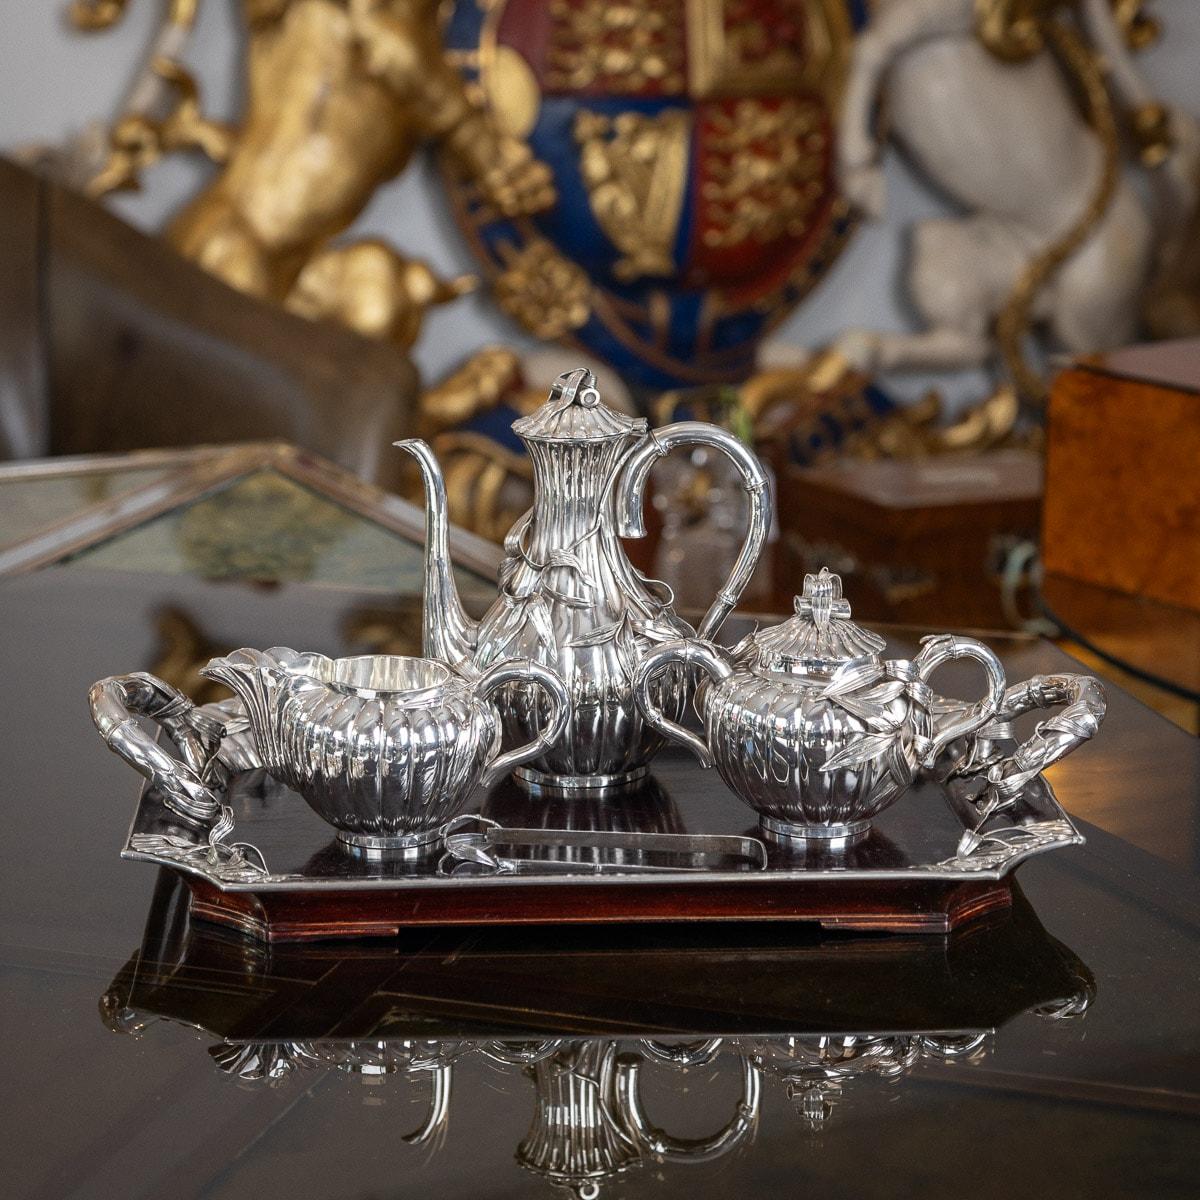 20th Century Japanese Solid Silver Coffee Set On Tray, Arthur & Bond, c.1900 In Good Condition For Sale In Royal Tunbridge Wells, Kent